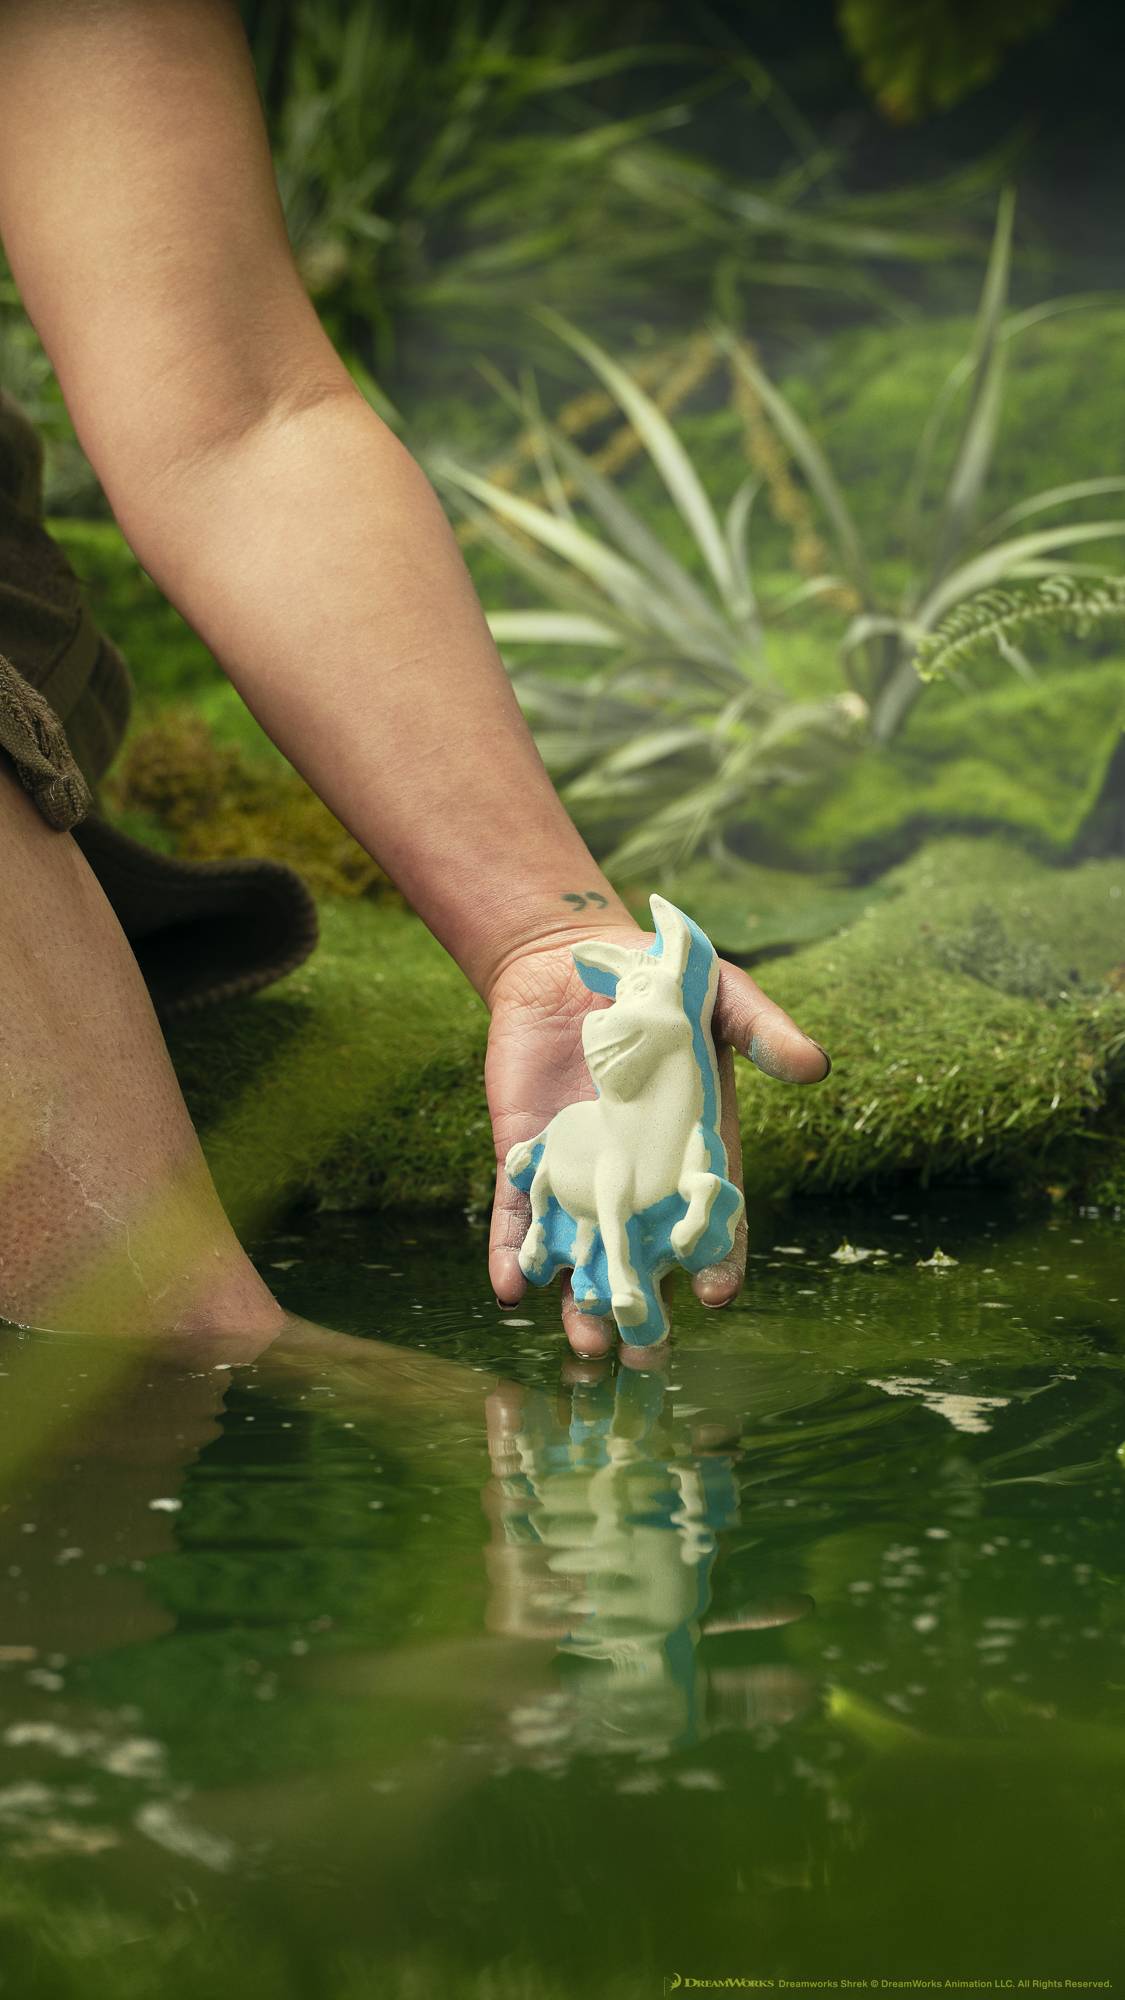 A close-up of the model's forearm and hand as they are holding the Donkey bath bob just above the surface of the pond water surrounded by moss and foliage. 